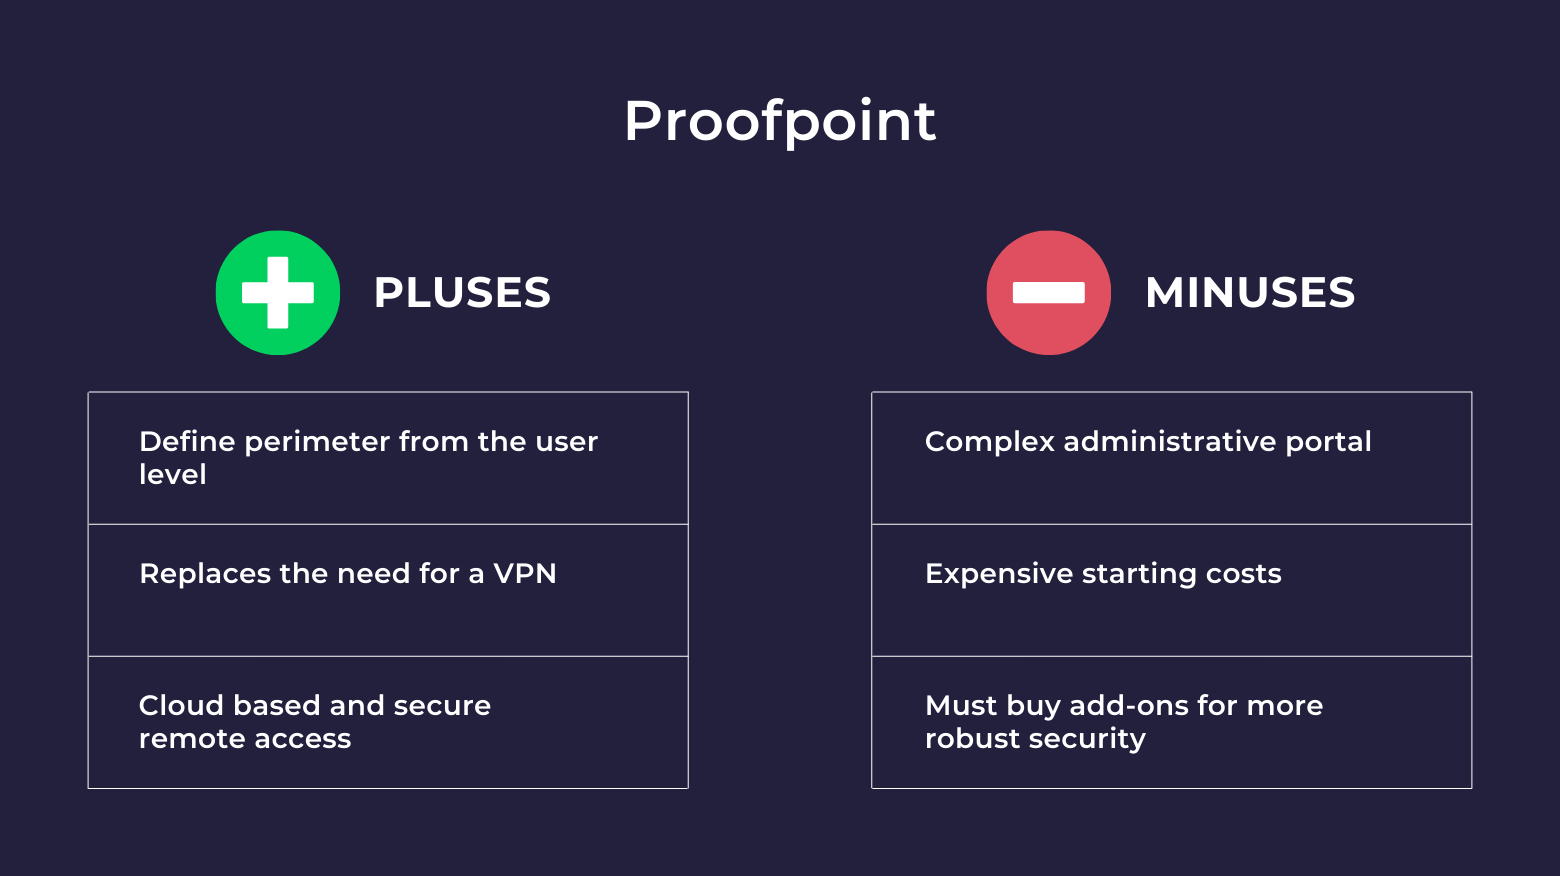 Alternatives to Proofpoint